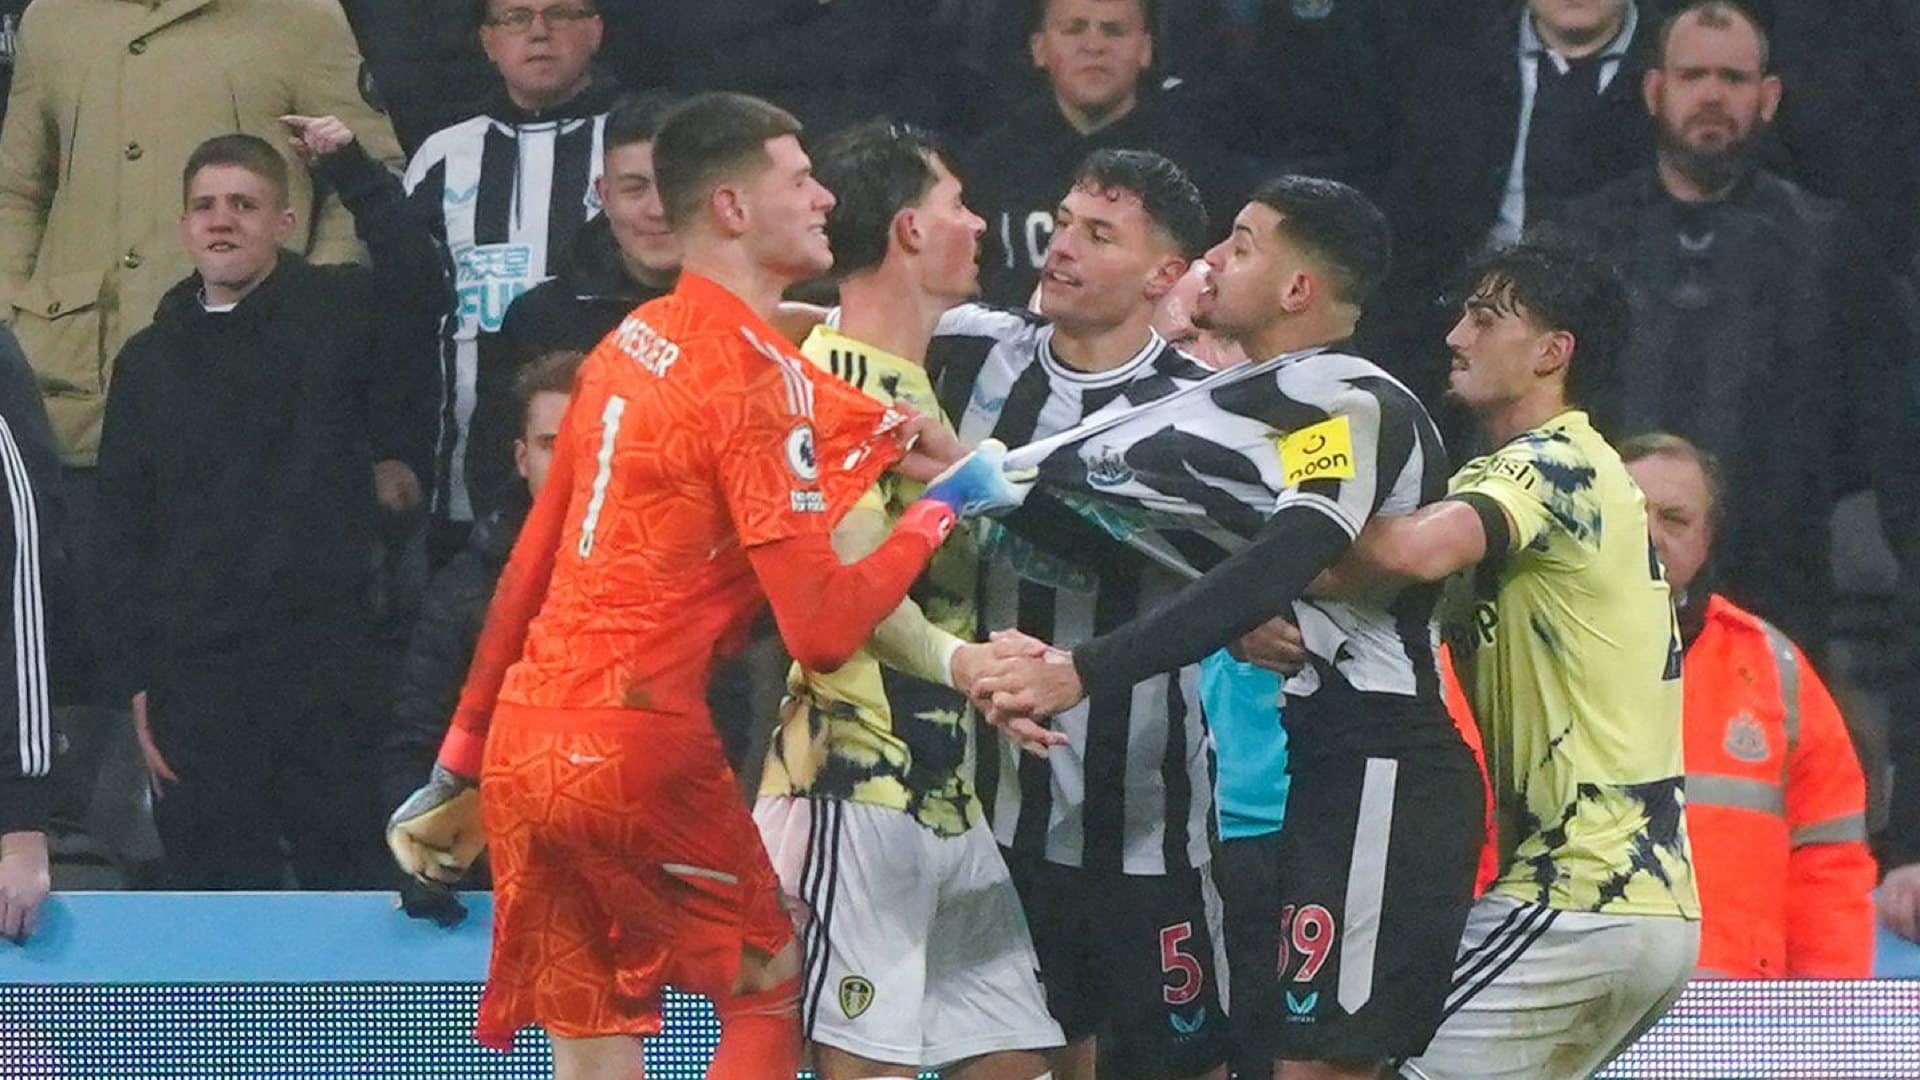 Leeds and Newcastle players having a good old scuffle in the rain, with Illan Meslier in the middle looking thoroughly unflapped